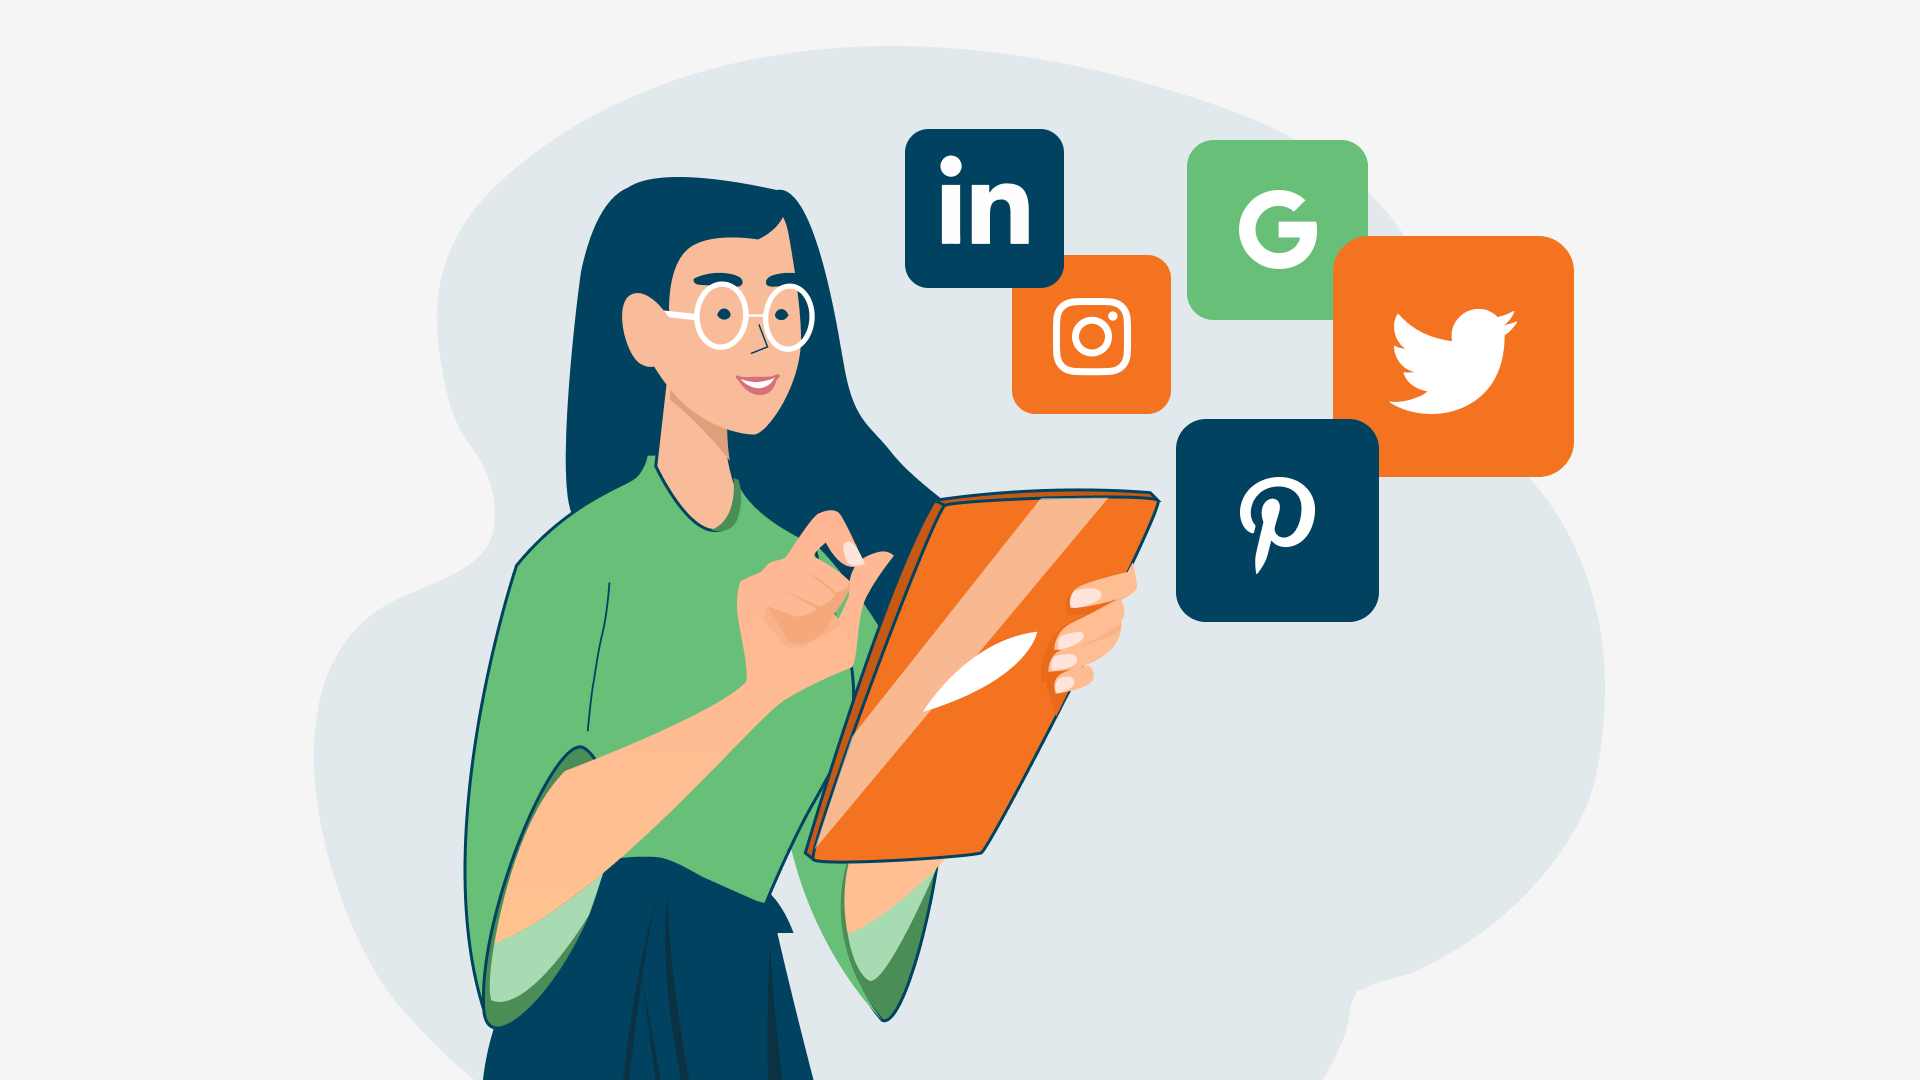 Loomly’s social media management platform makes it easy to manage all your social media accounts